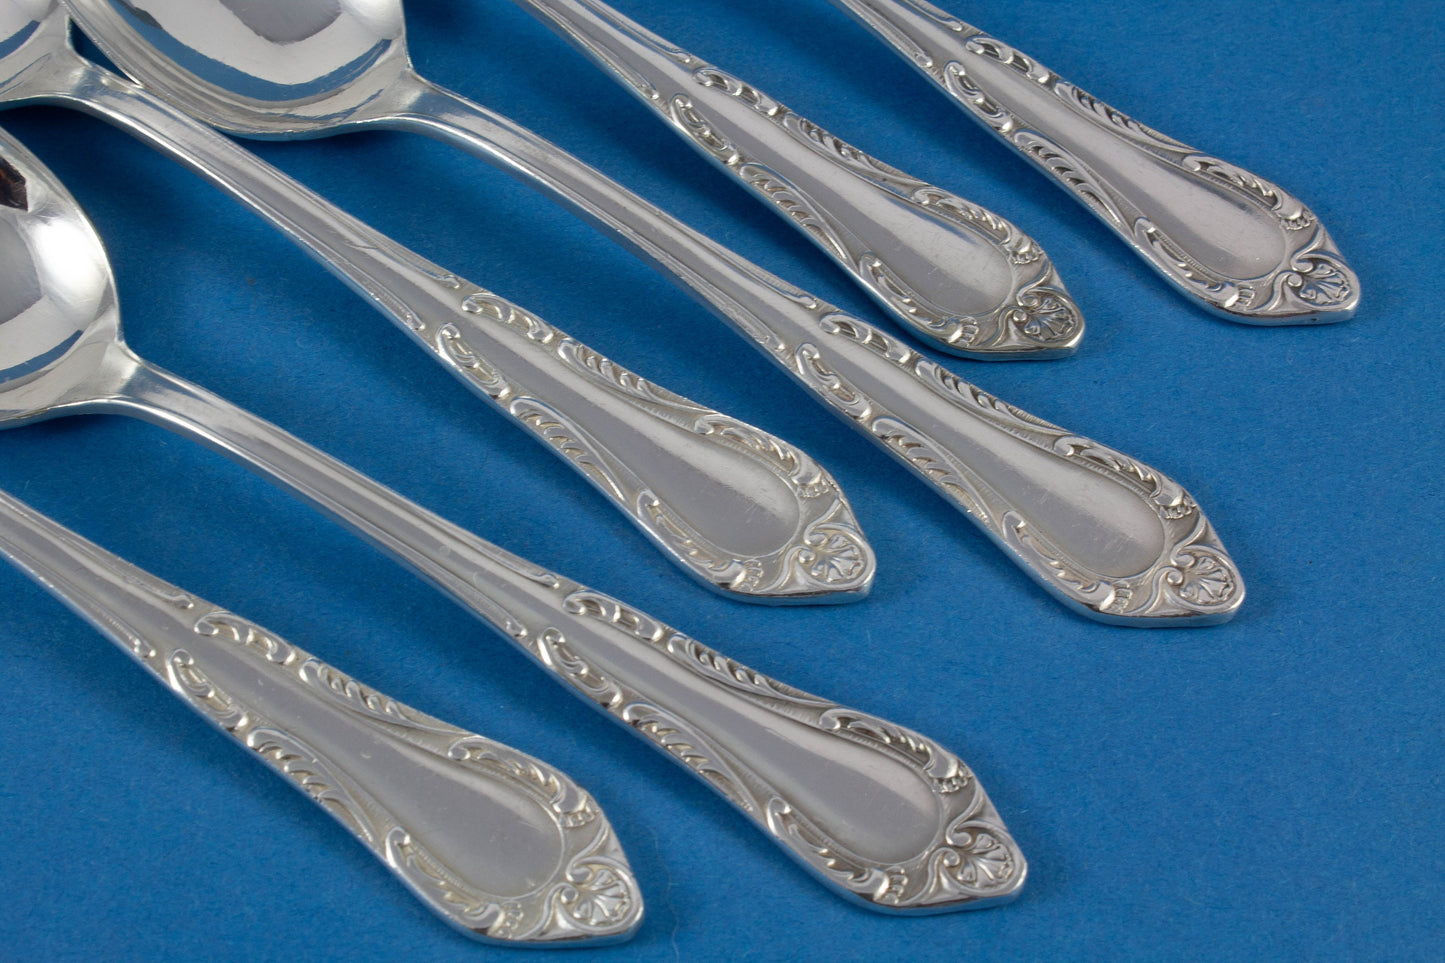 6 silver-plated teaspoons in Art Nouveau style